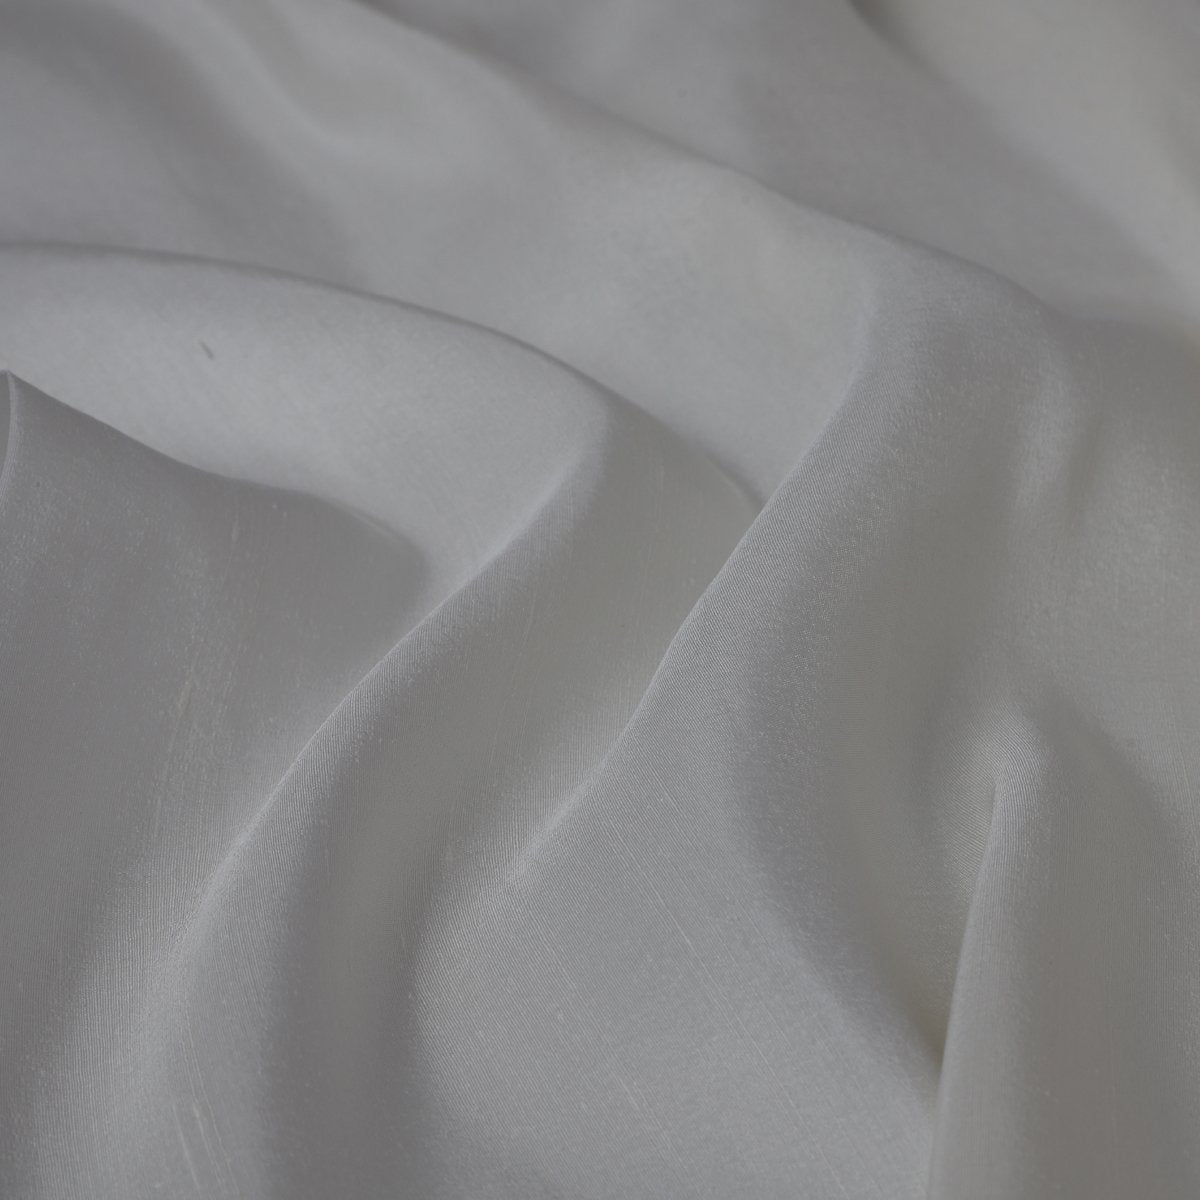 Off White Color 80 GLM Dupion Silk Dyeable Fabric